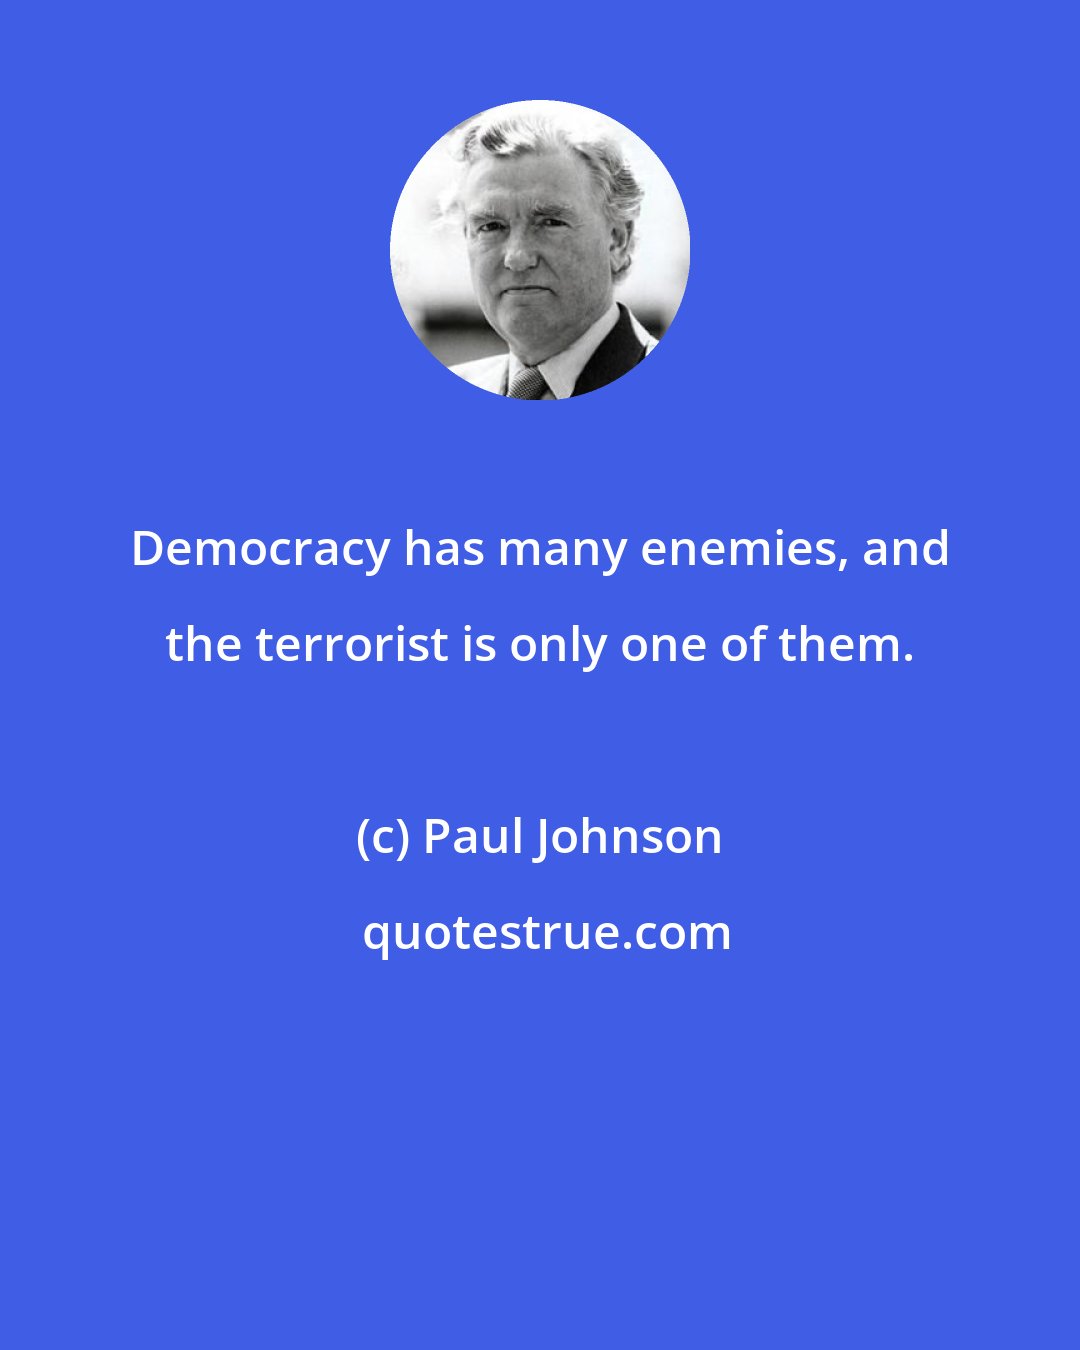 Paul Johnson: Democracy has many enemies, and the terrorist is only one of them.